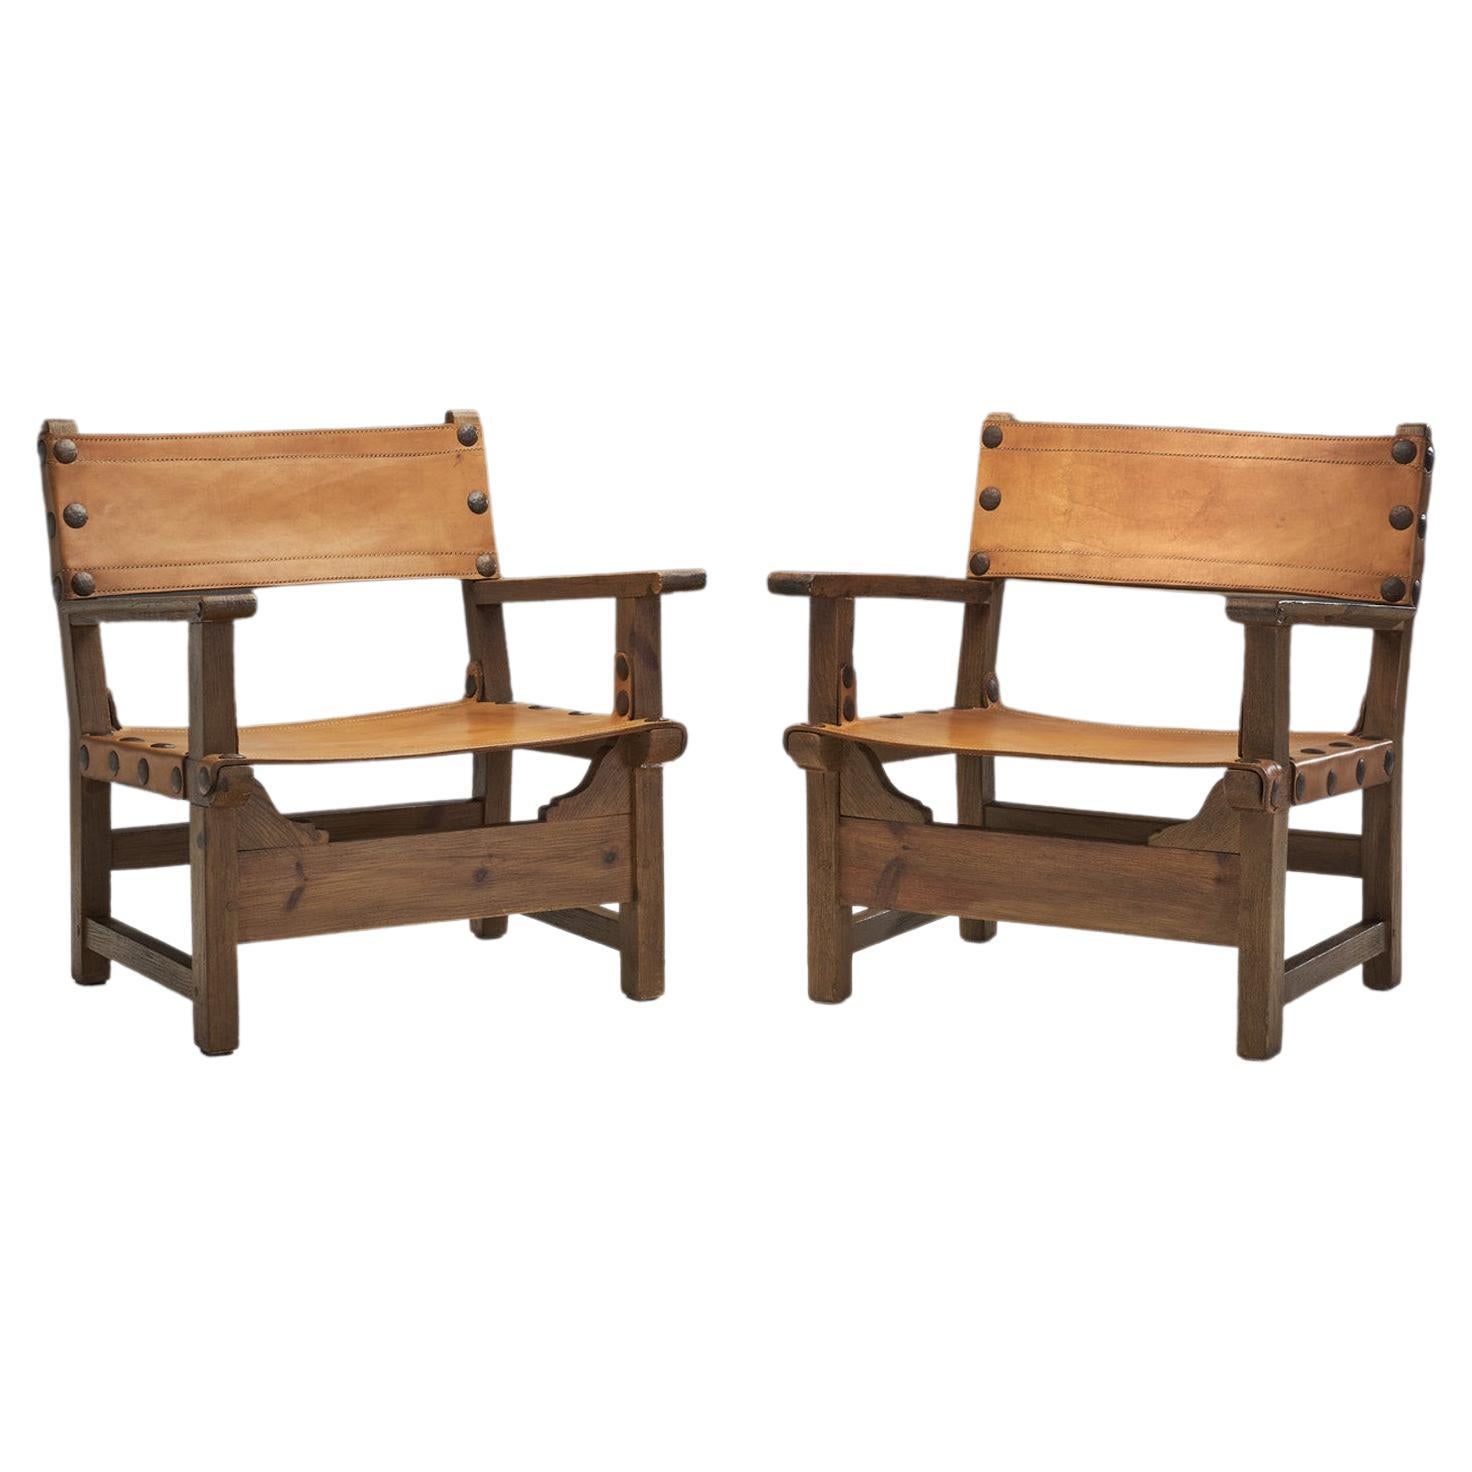 Wood and Cognac Saddle Leather "Spanish Chairs", Europe, 1960s For Sale